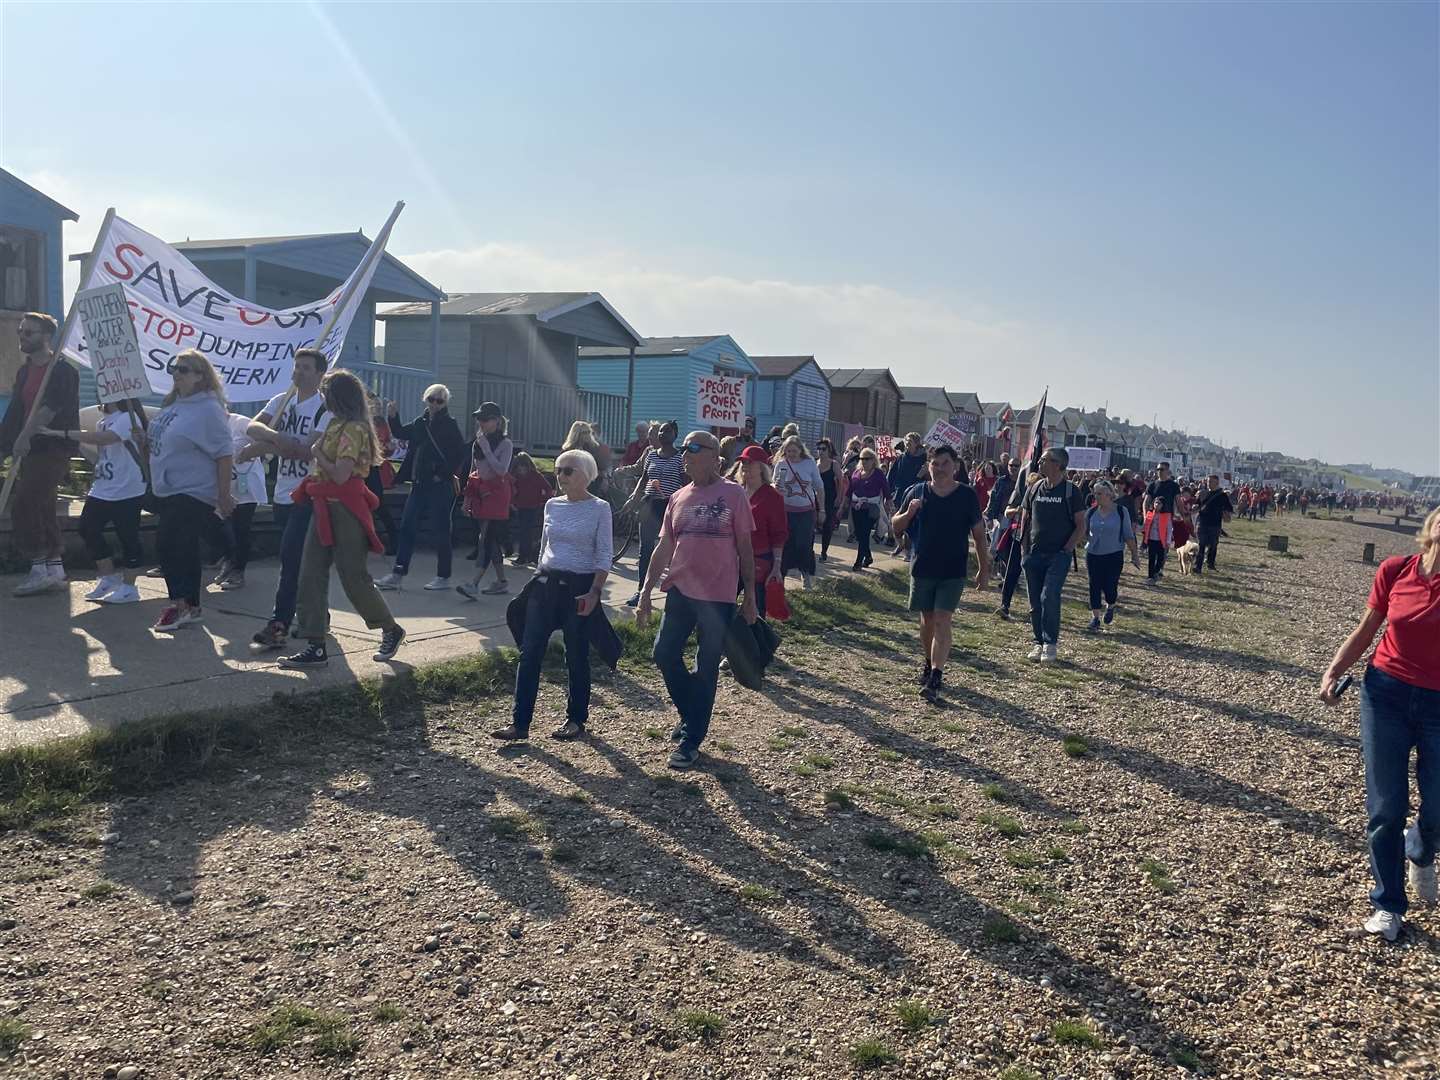 There was a similar protest in Whitstable earlier this month. Picture: SOS Whitstable